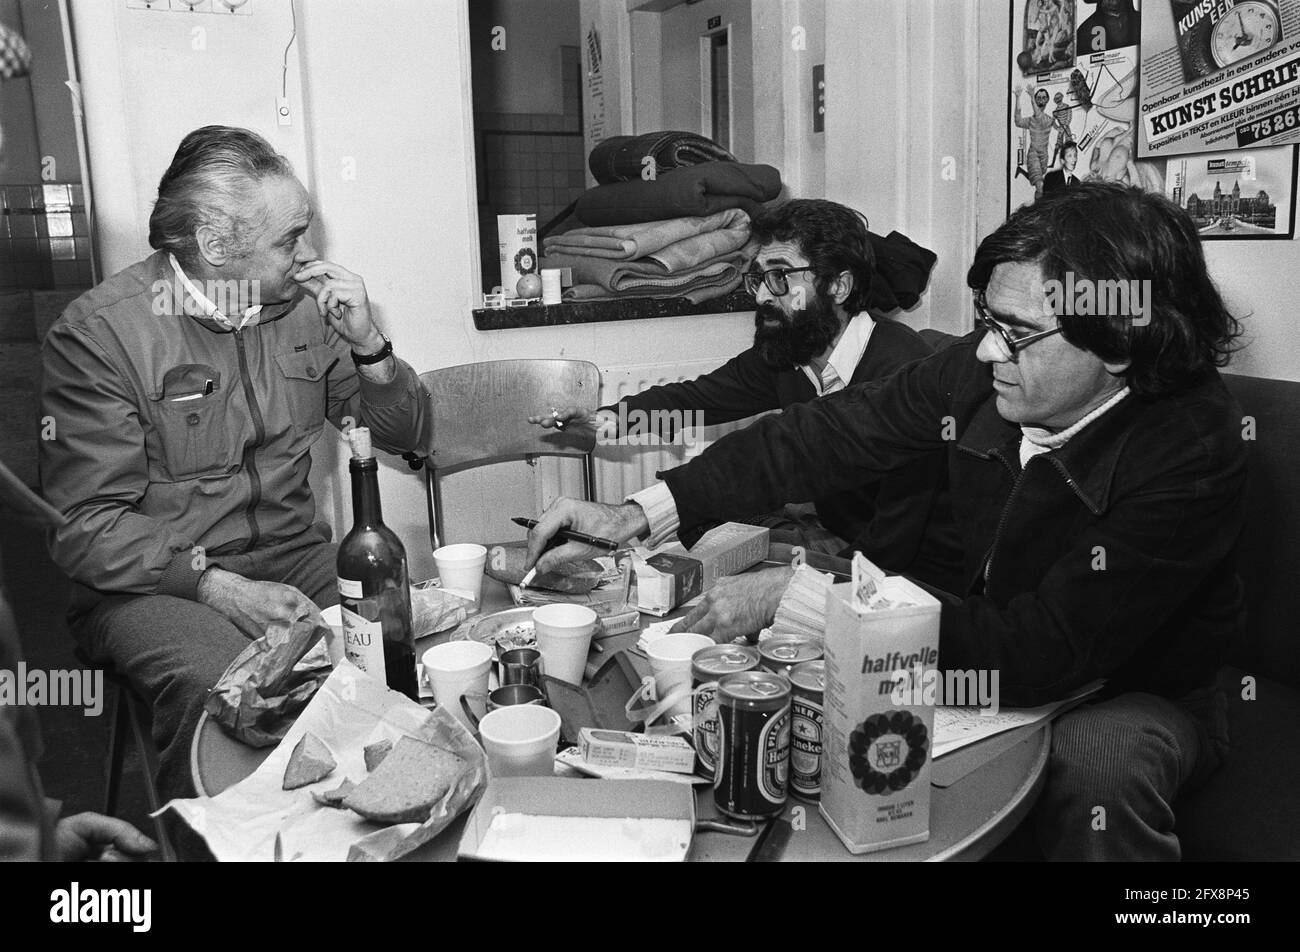 Occupiers around a crowded table, December 19, 1979, civil servants, occupations, students, tables, scientific education, The Netherlands, 20th century press agency photo, news to remember, documentary, historic photography 1945-1990, visual stories, human history of the Twentieth Century, capturing moments in time Stock Photo